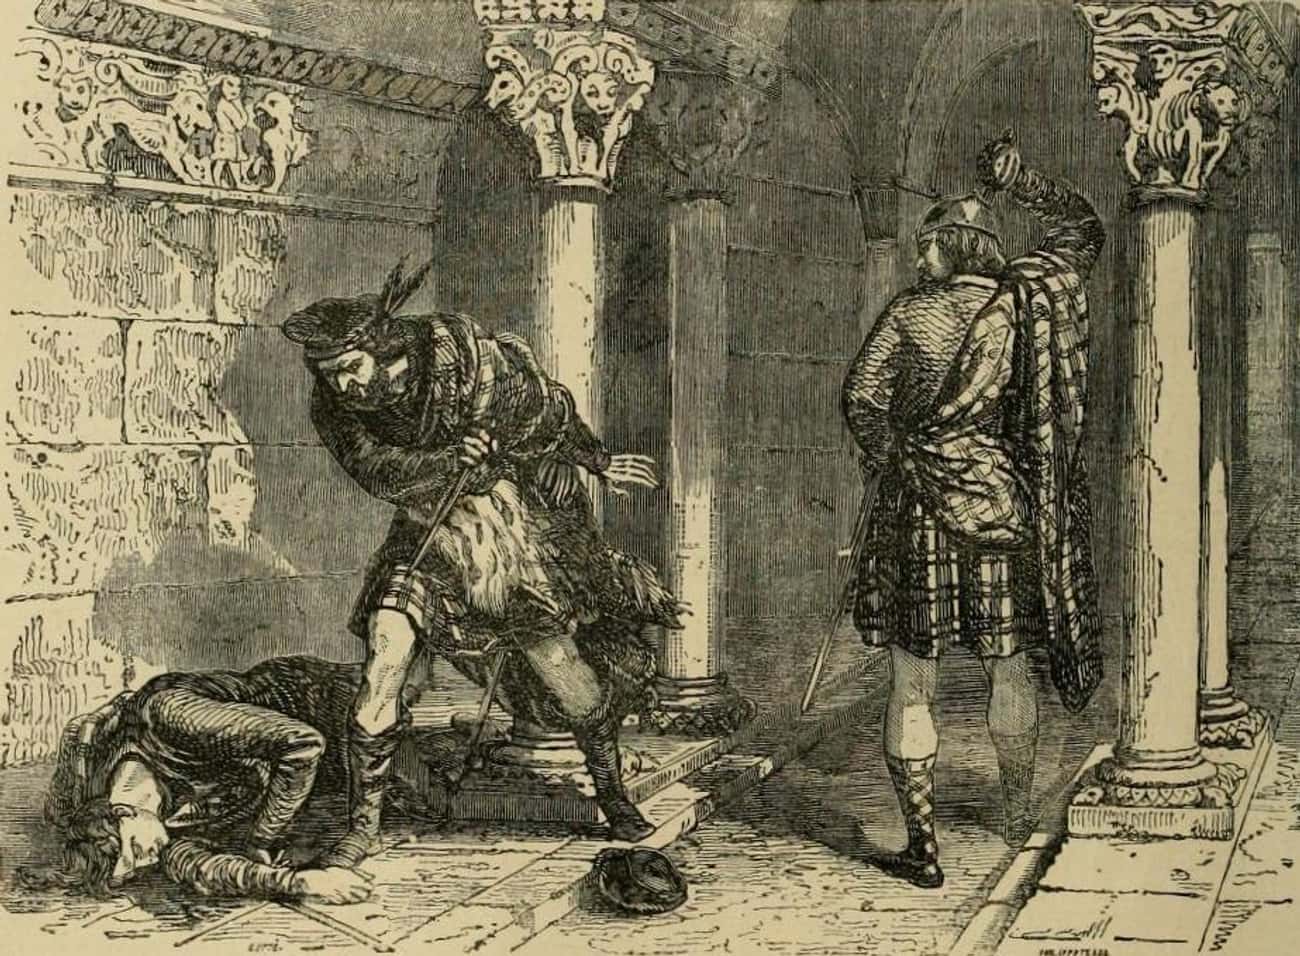 Robert The Bruce Stabbed His Rival To Death In A Church